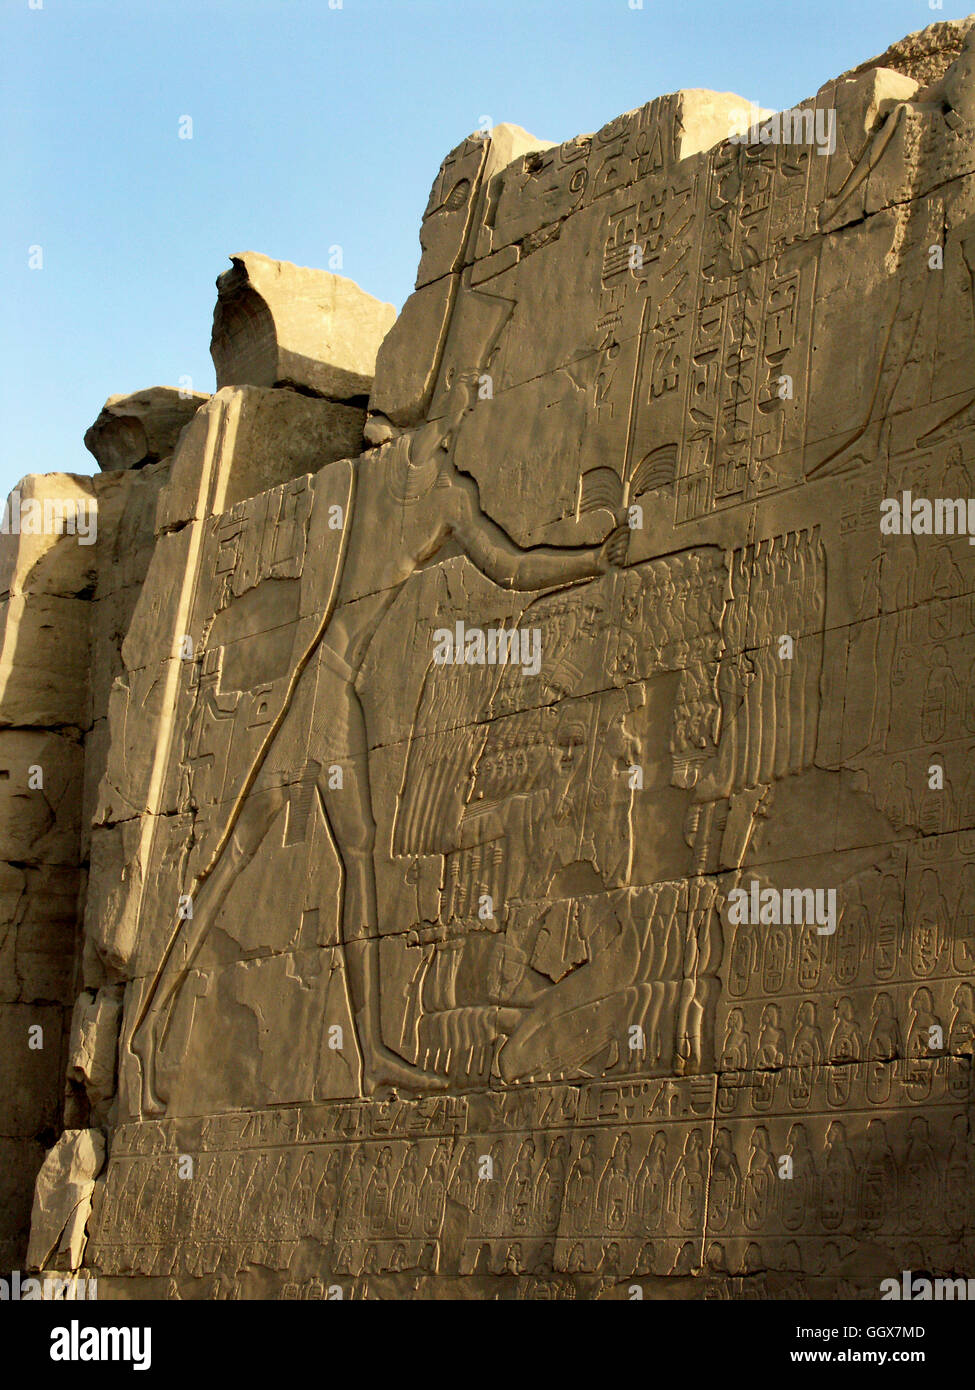 Wall relief of pharaoh Ramesis IV smiting enemies in the courtyard of the Temple of Karnak at Luxor – Egypt. Stock Photo